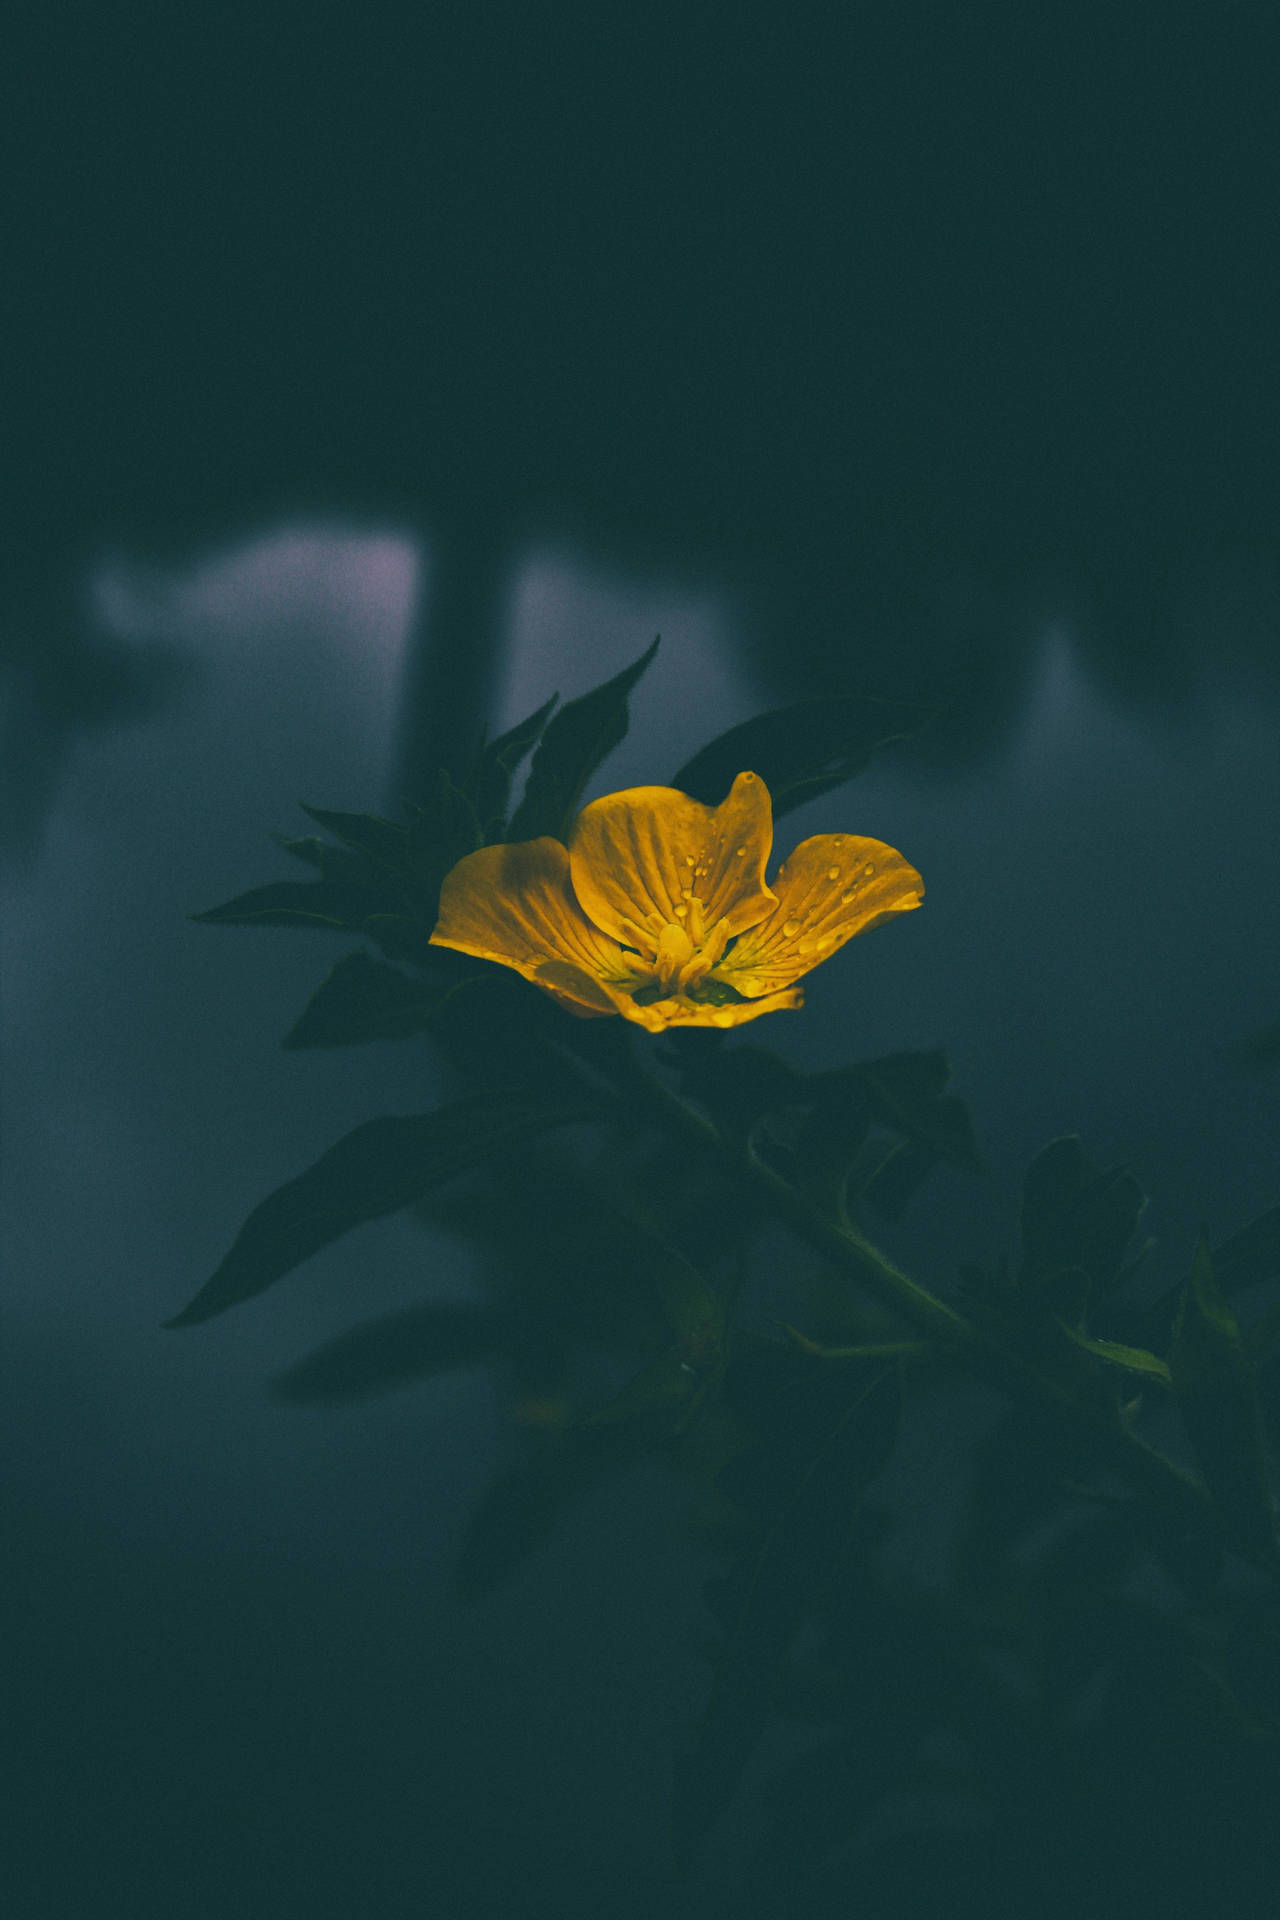 A bright and cheery yellow flower against a blurred gray background. Wallpaper